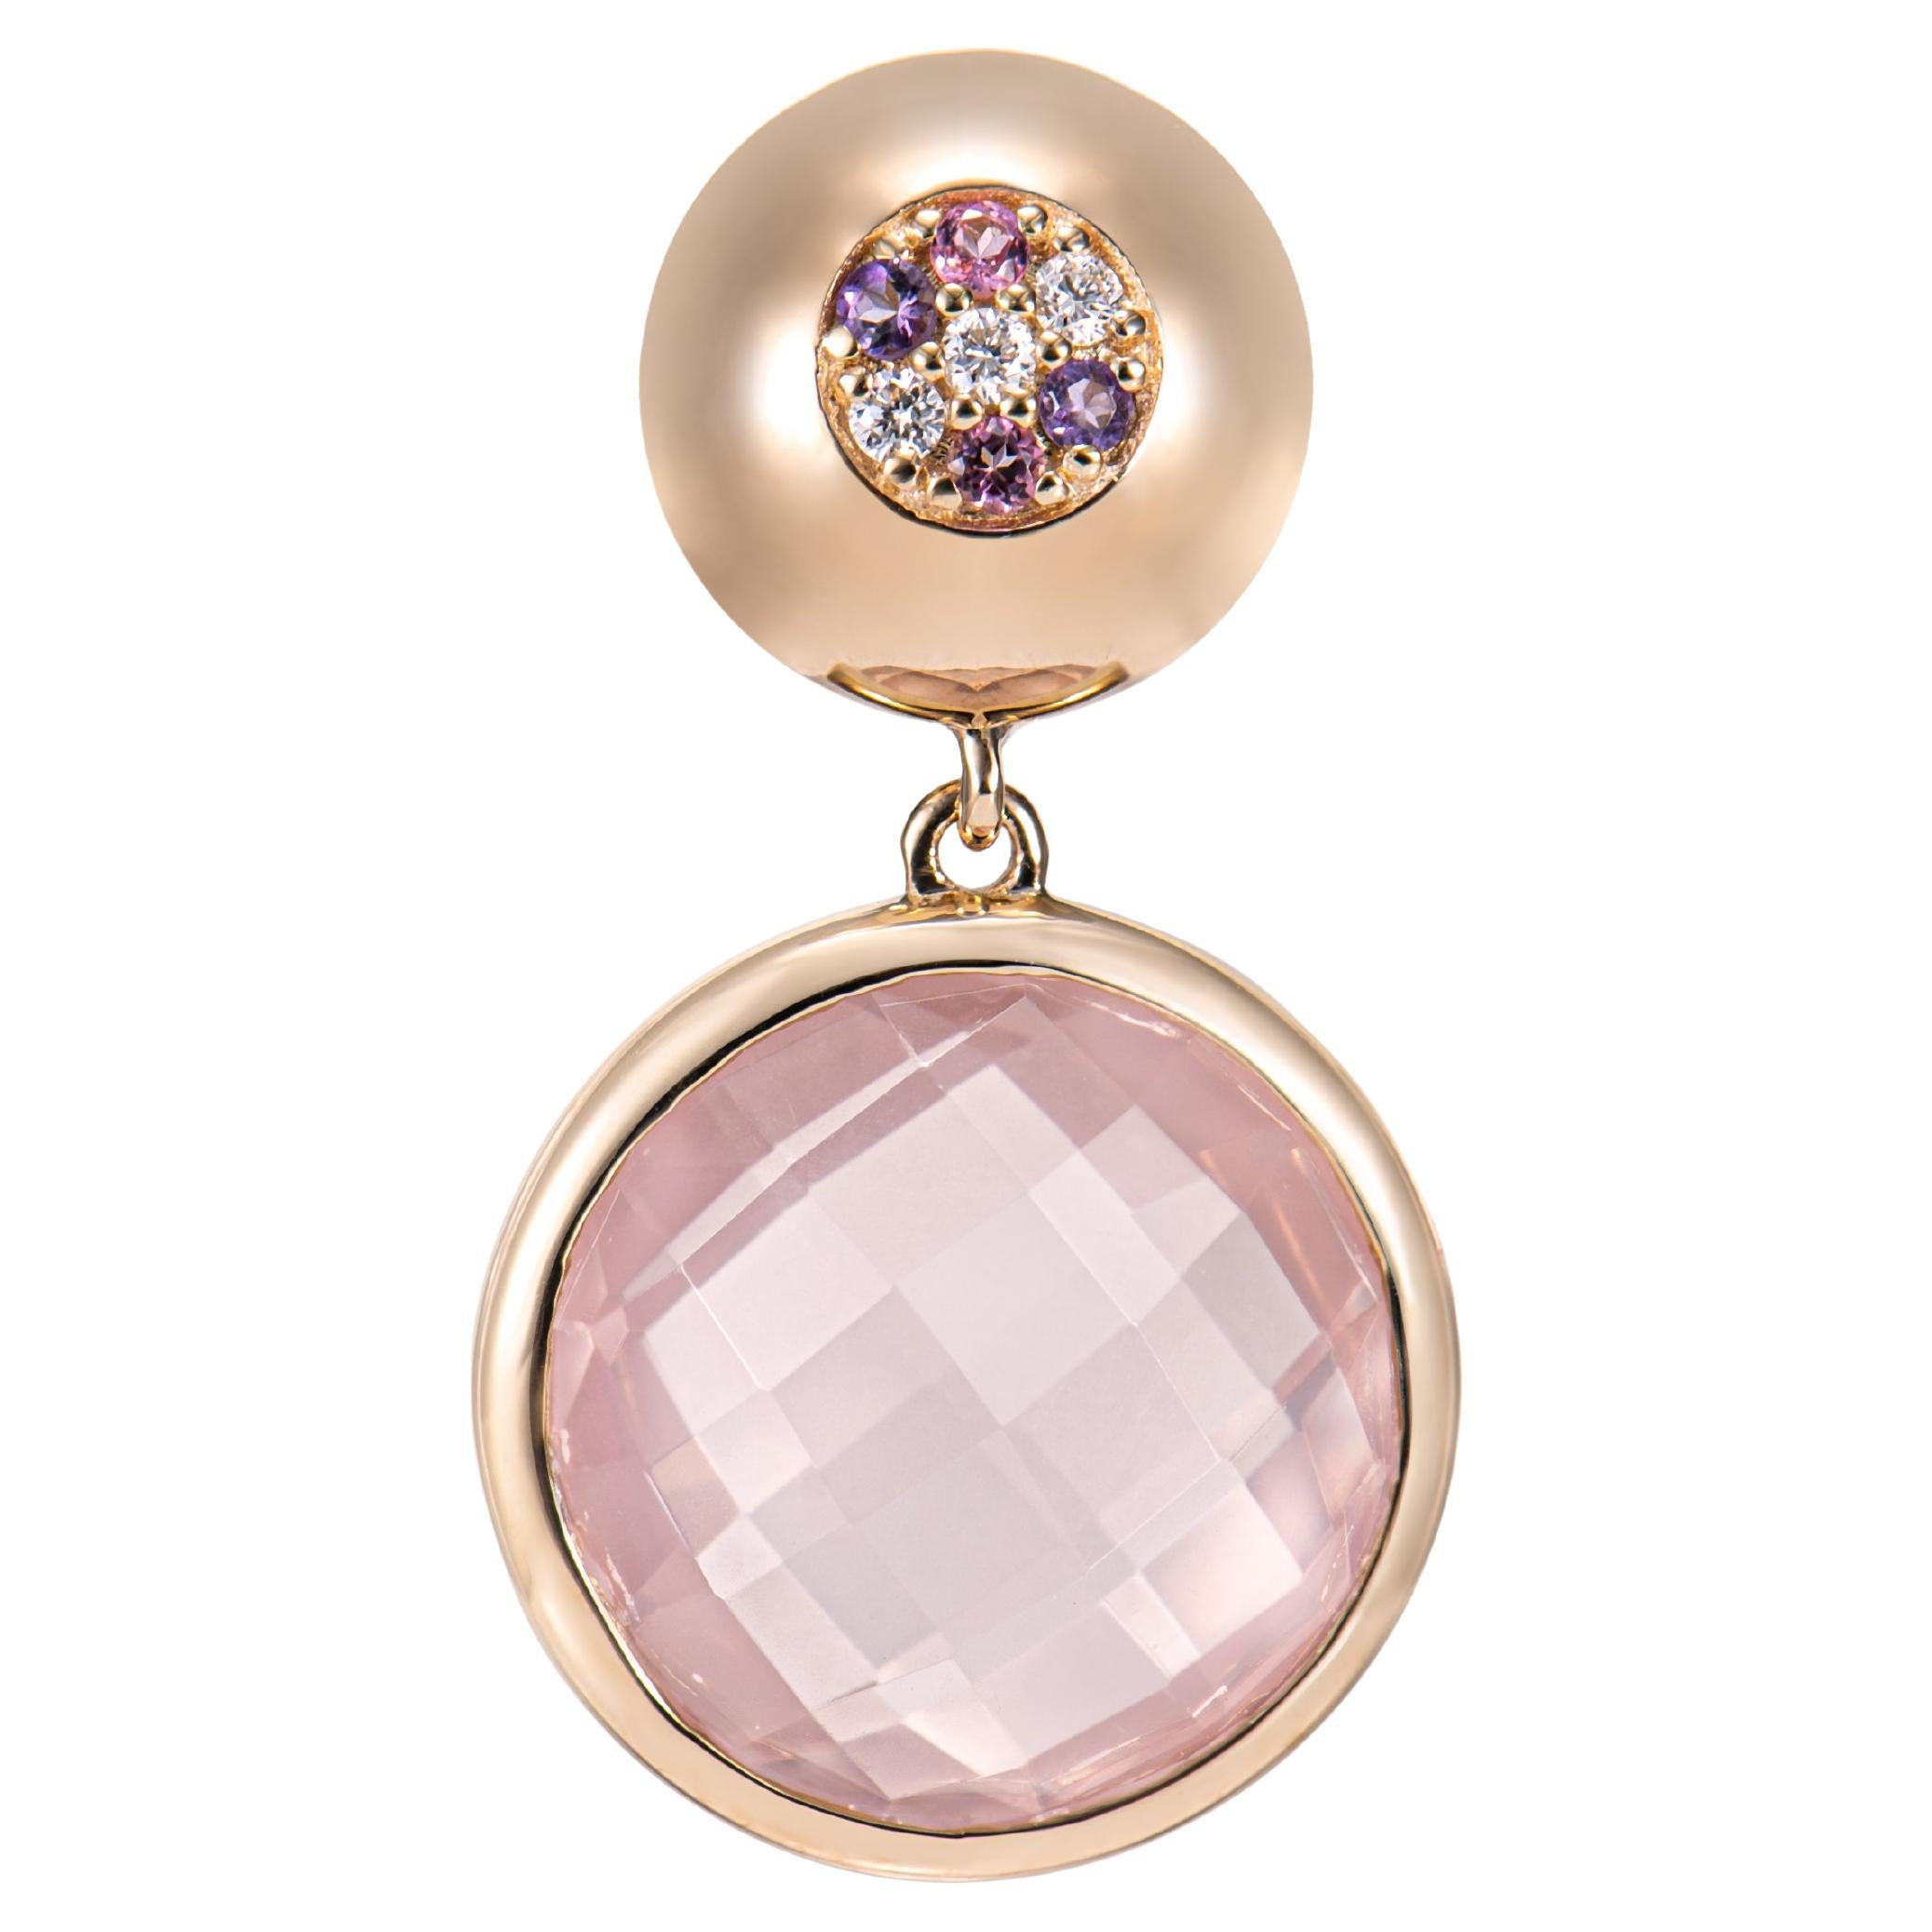 9.27 Carat Rose Quartz Pendant in 18KYG with Tourmaline, Amethyst and Diamond. For Sale